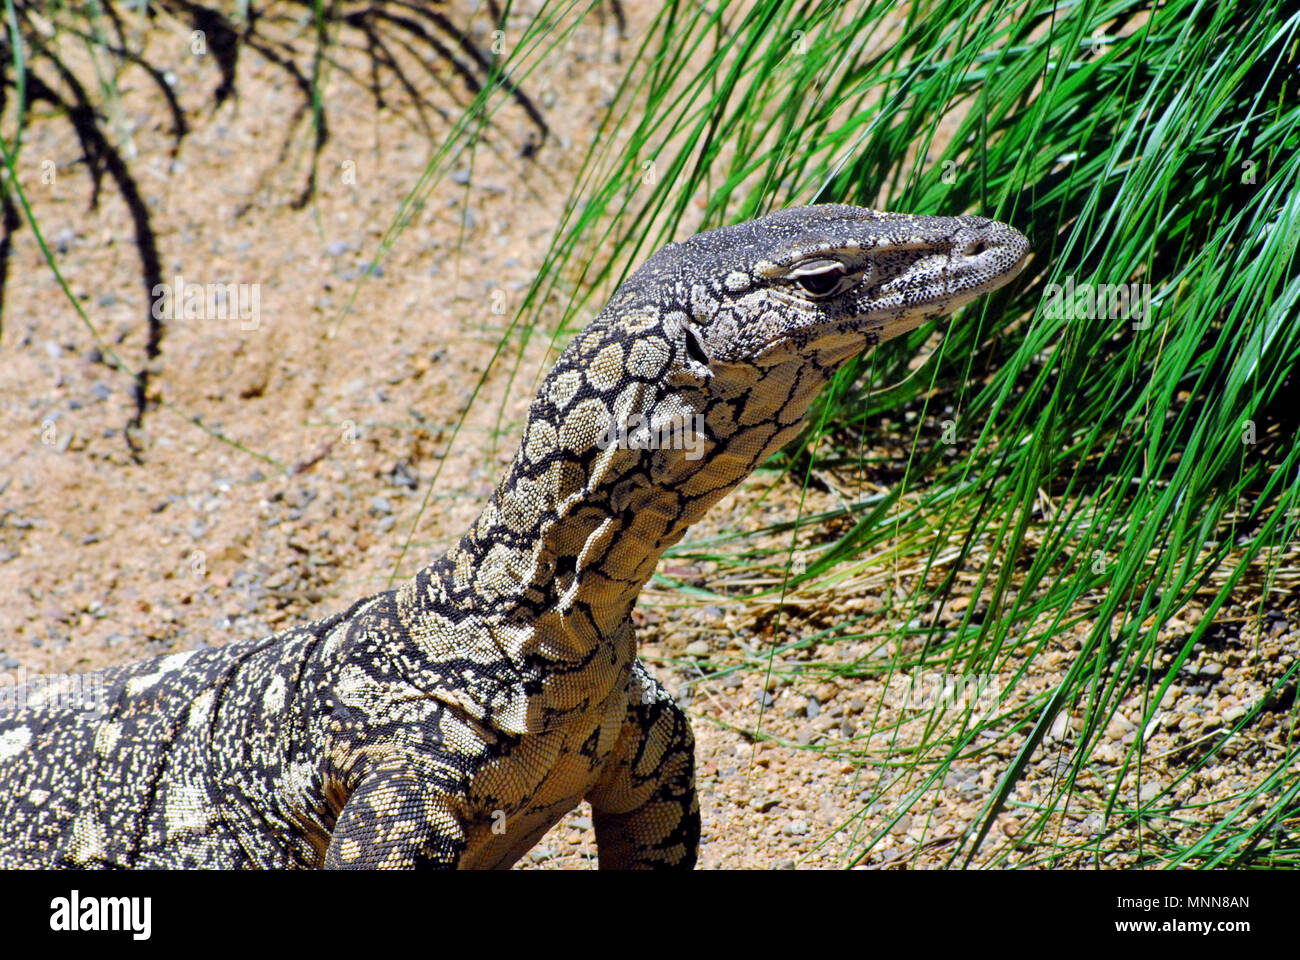 Extreme close up of a large wild Mangrove Monitor Lizard (family Varanidae) which was photographed on a shoreline in Southern Australia. Stock Photo